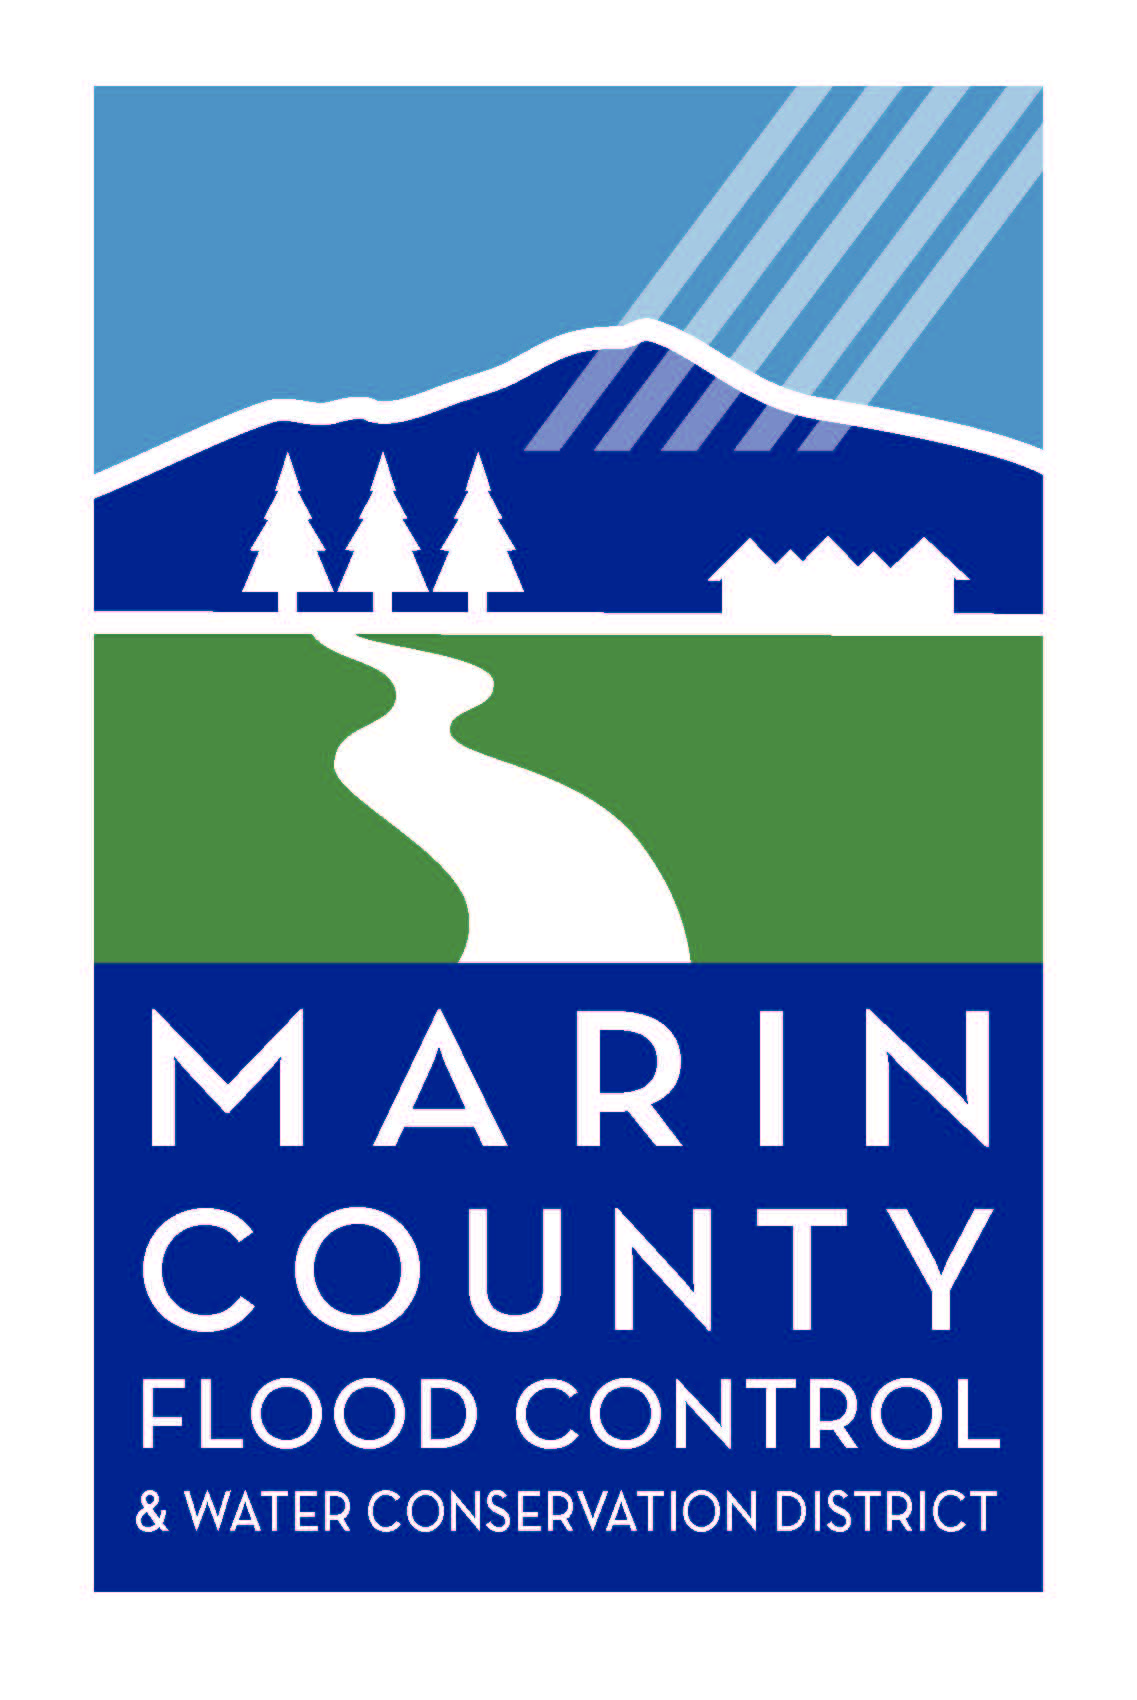 Marin County Flood Control and Water Conservation District logo